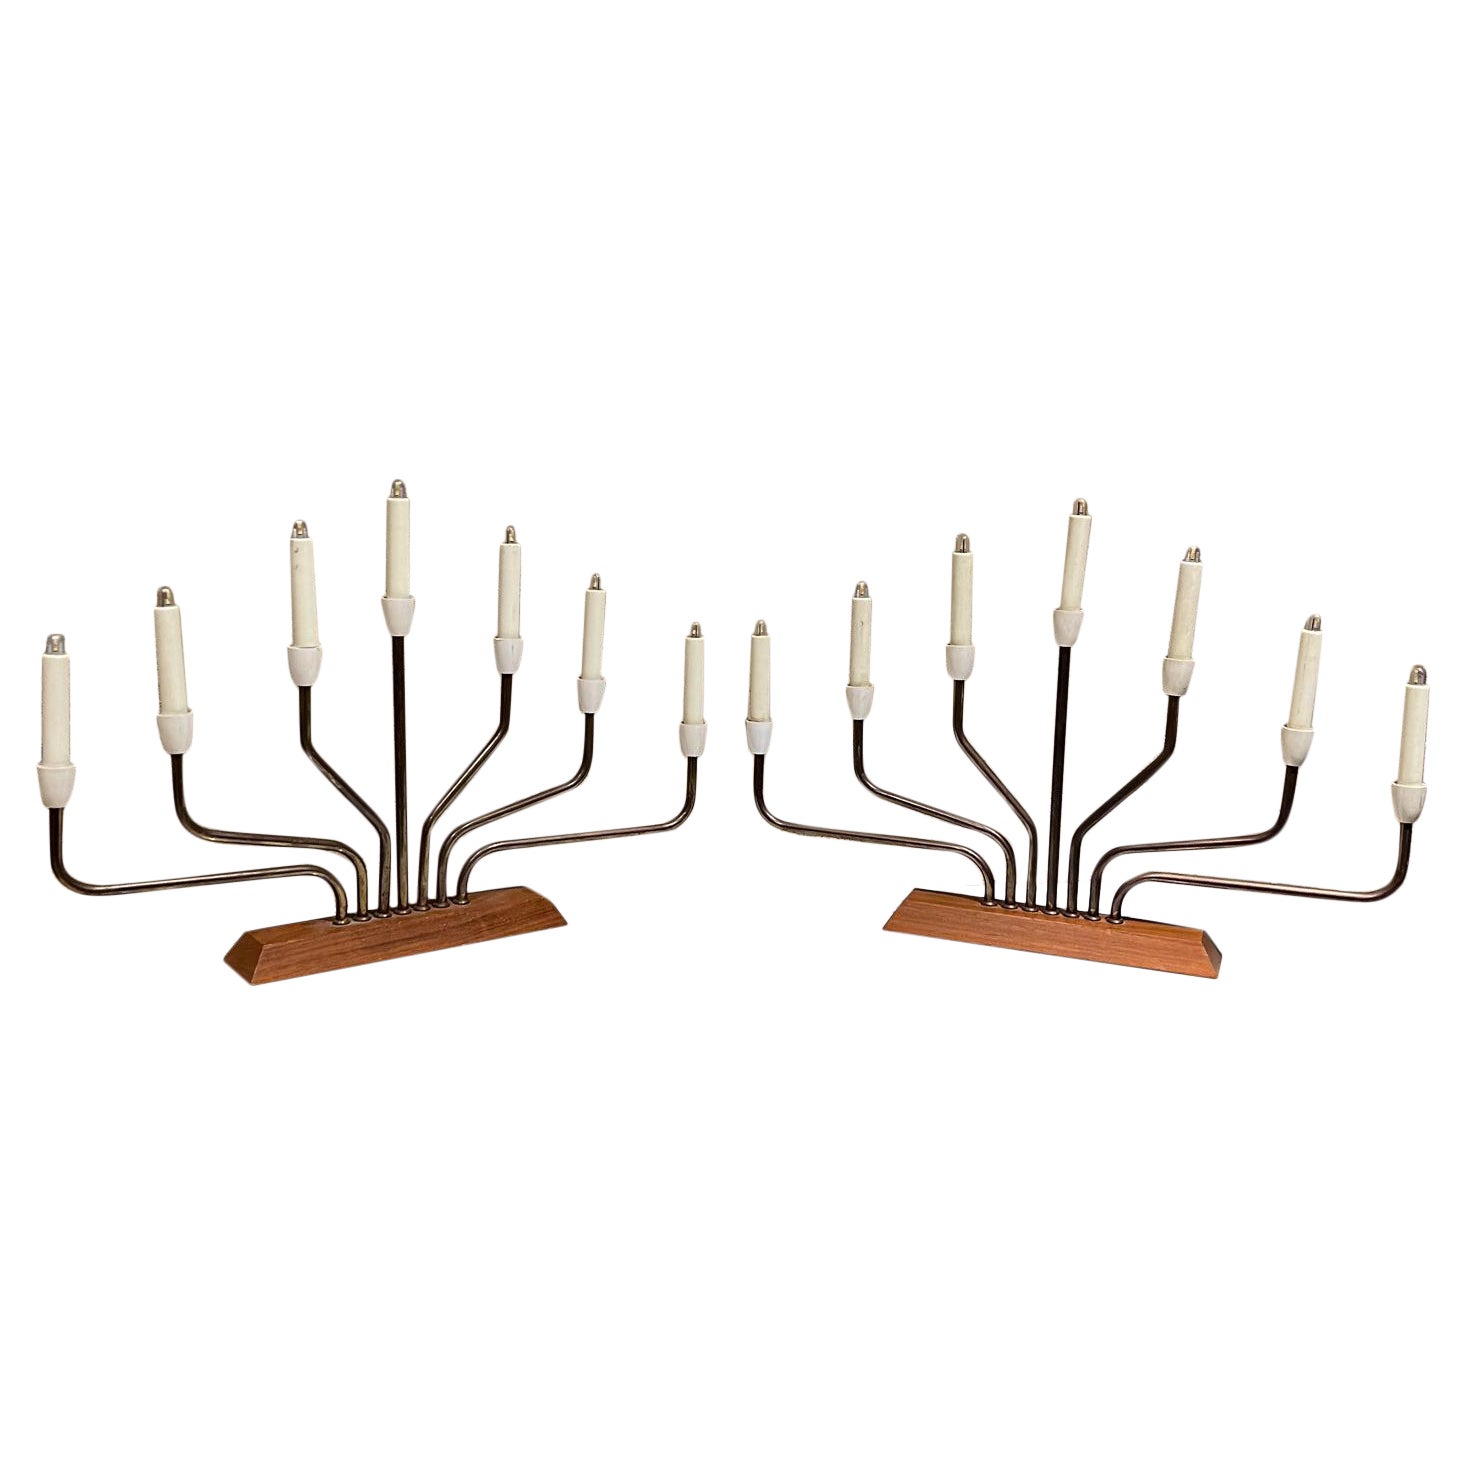 Menorah Lamp Pair
1960s Sculptural European Elegance Modern Menorah Table Lamps Teak and Brass. 
Made in Europe.
Decorative pair each lamp with seven arms in the shape a menorah.
Designed on teak base with brass body.
14.25 tall x 18.25 w x